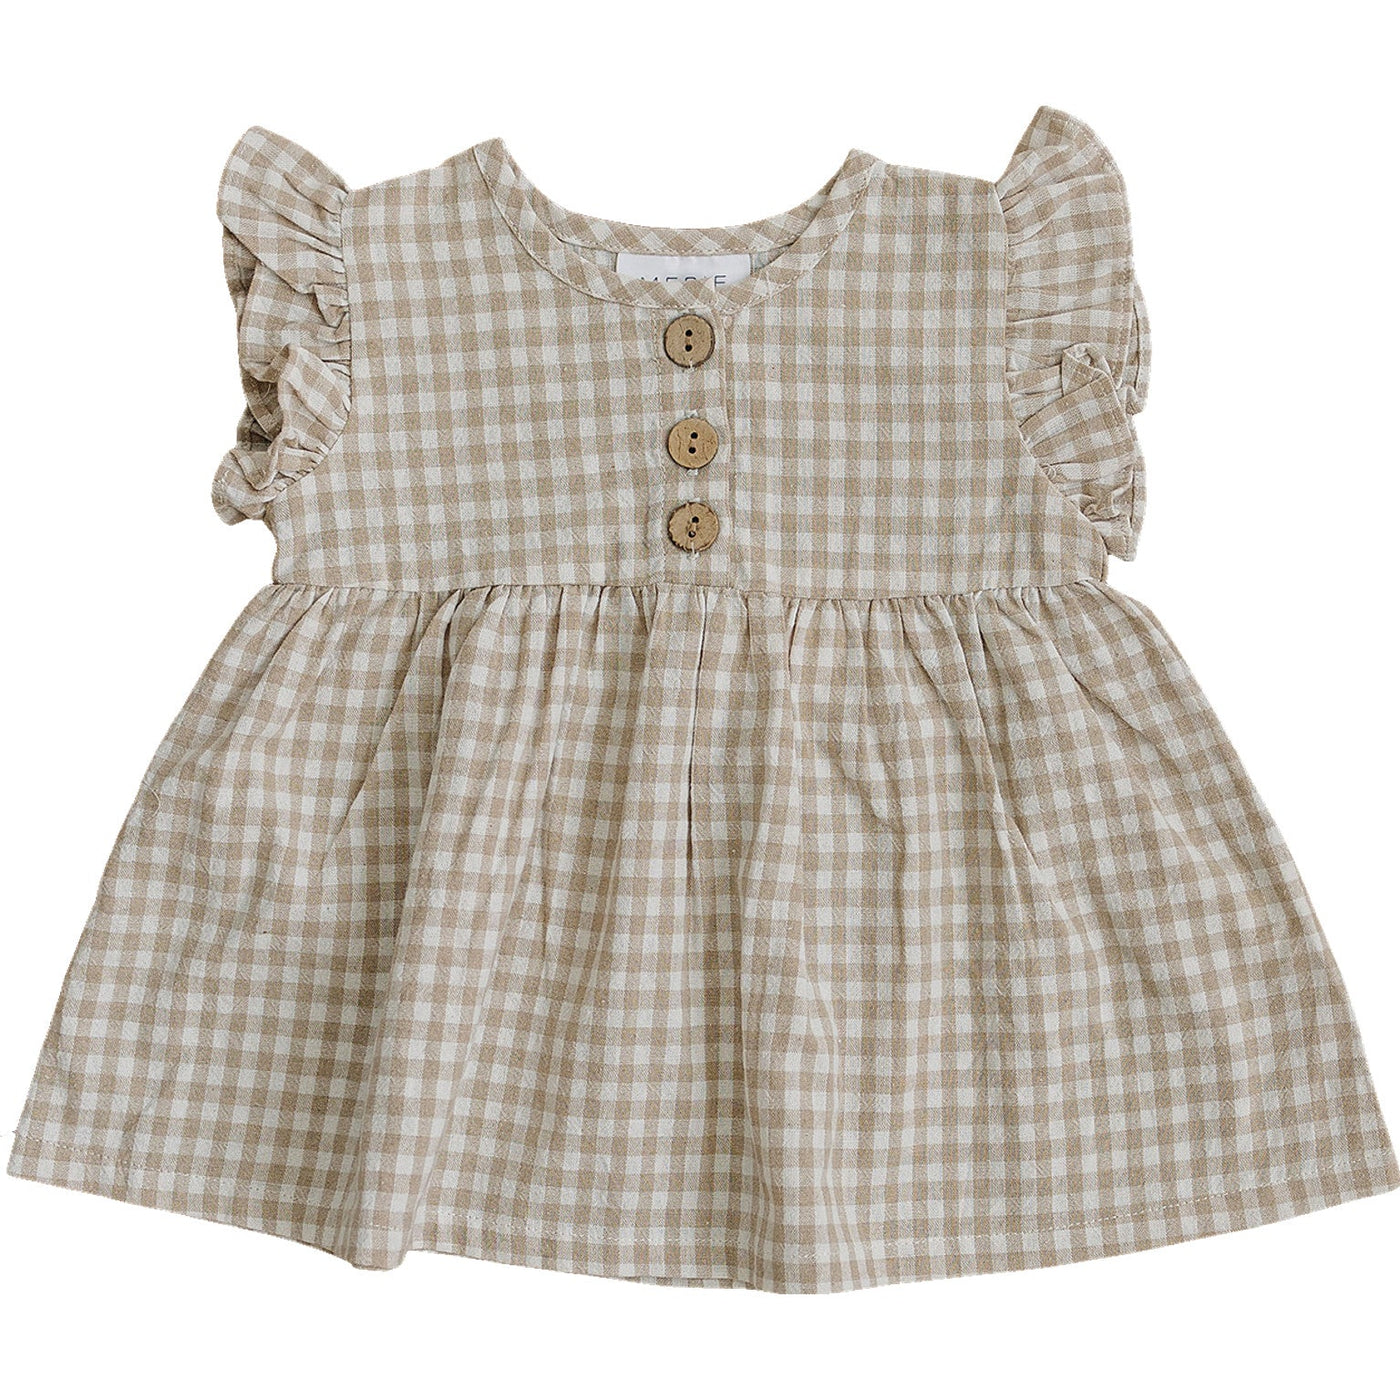 a brown and white checkered dress